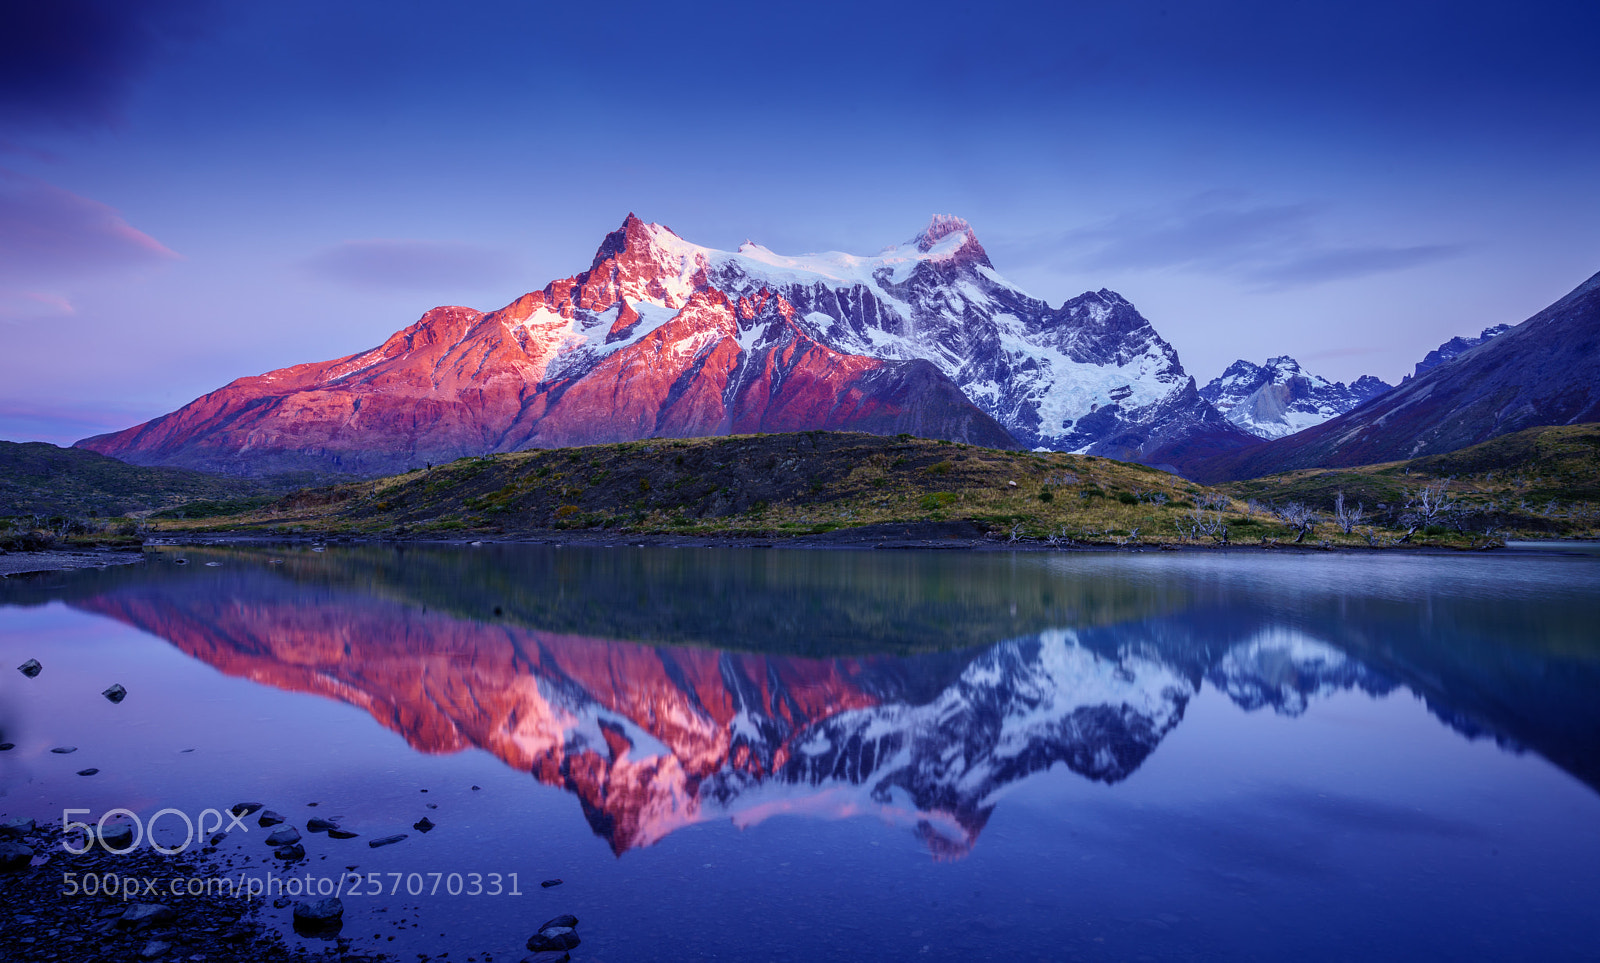 Sony a7R II sample photo. Cuernos del paine dawn photography